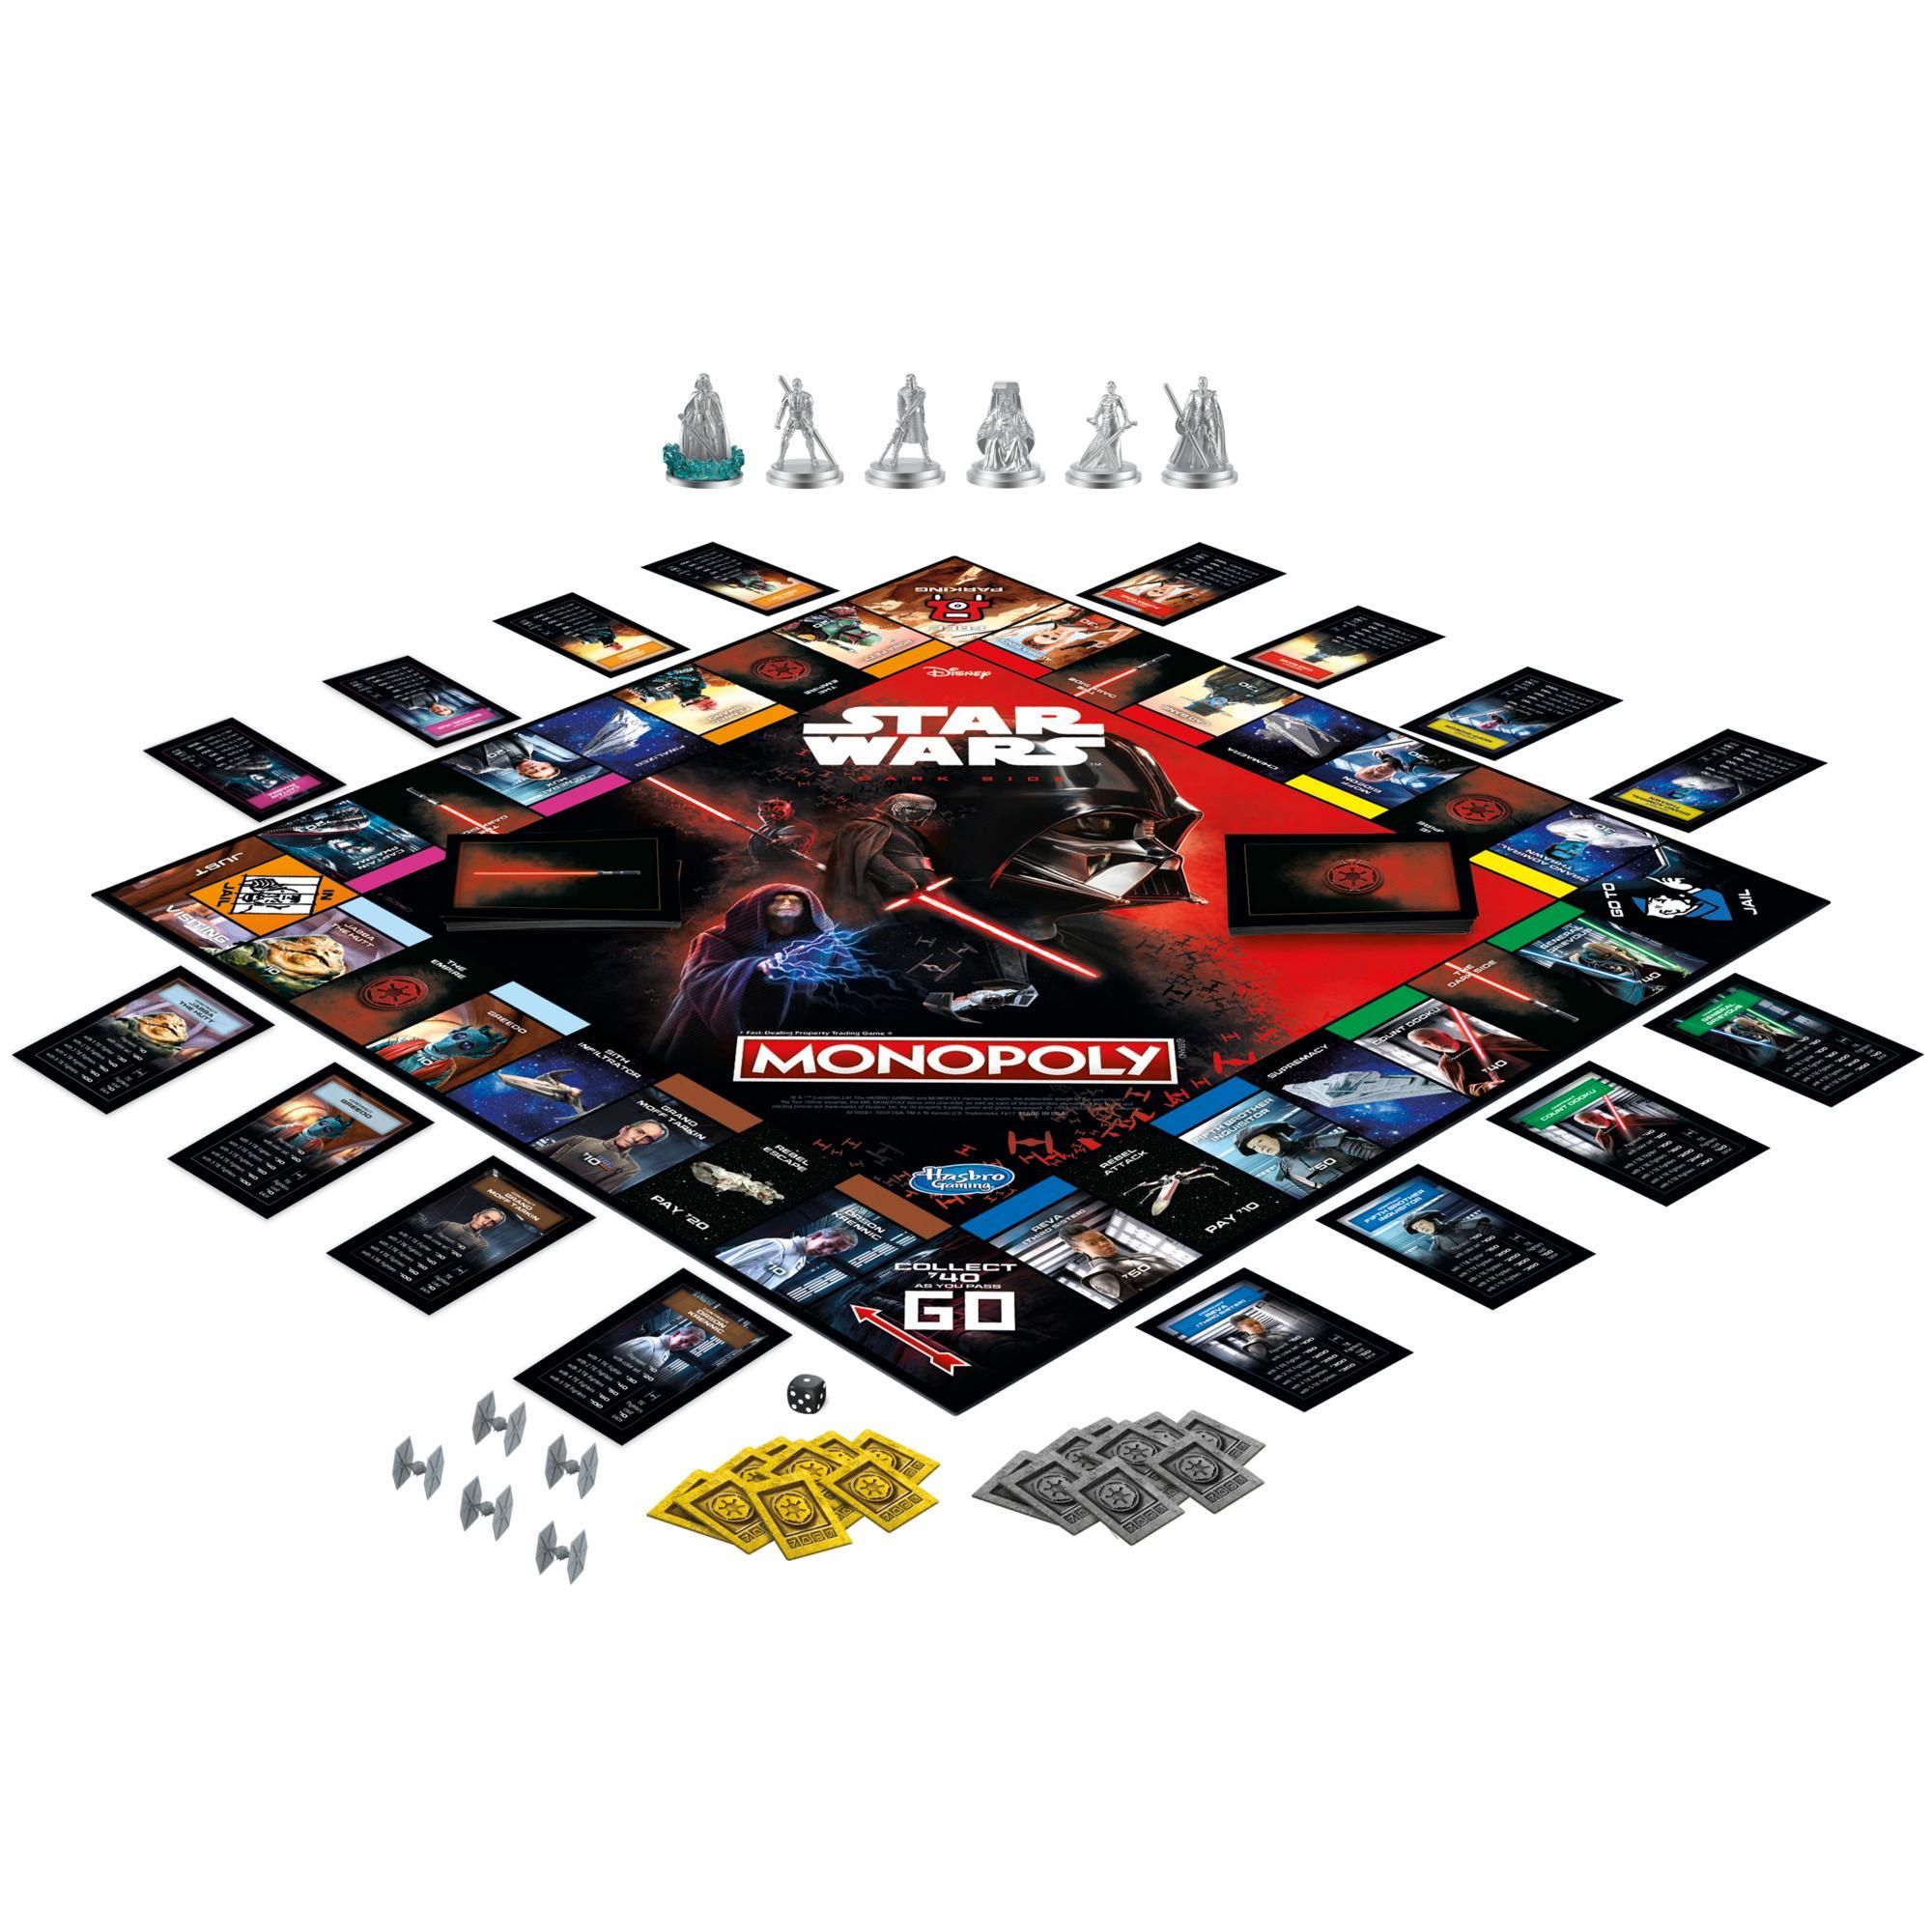 Monopoly: Disney Star Wars Dark Side Edition Board Game for Families, Games for Kids, Star Wars Gift product thumbnail 1